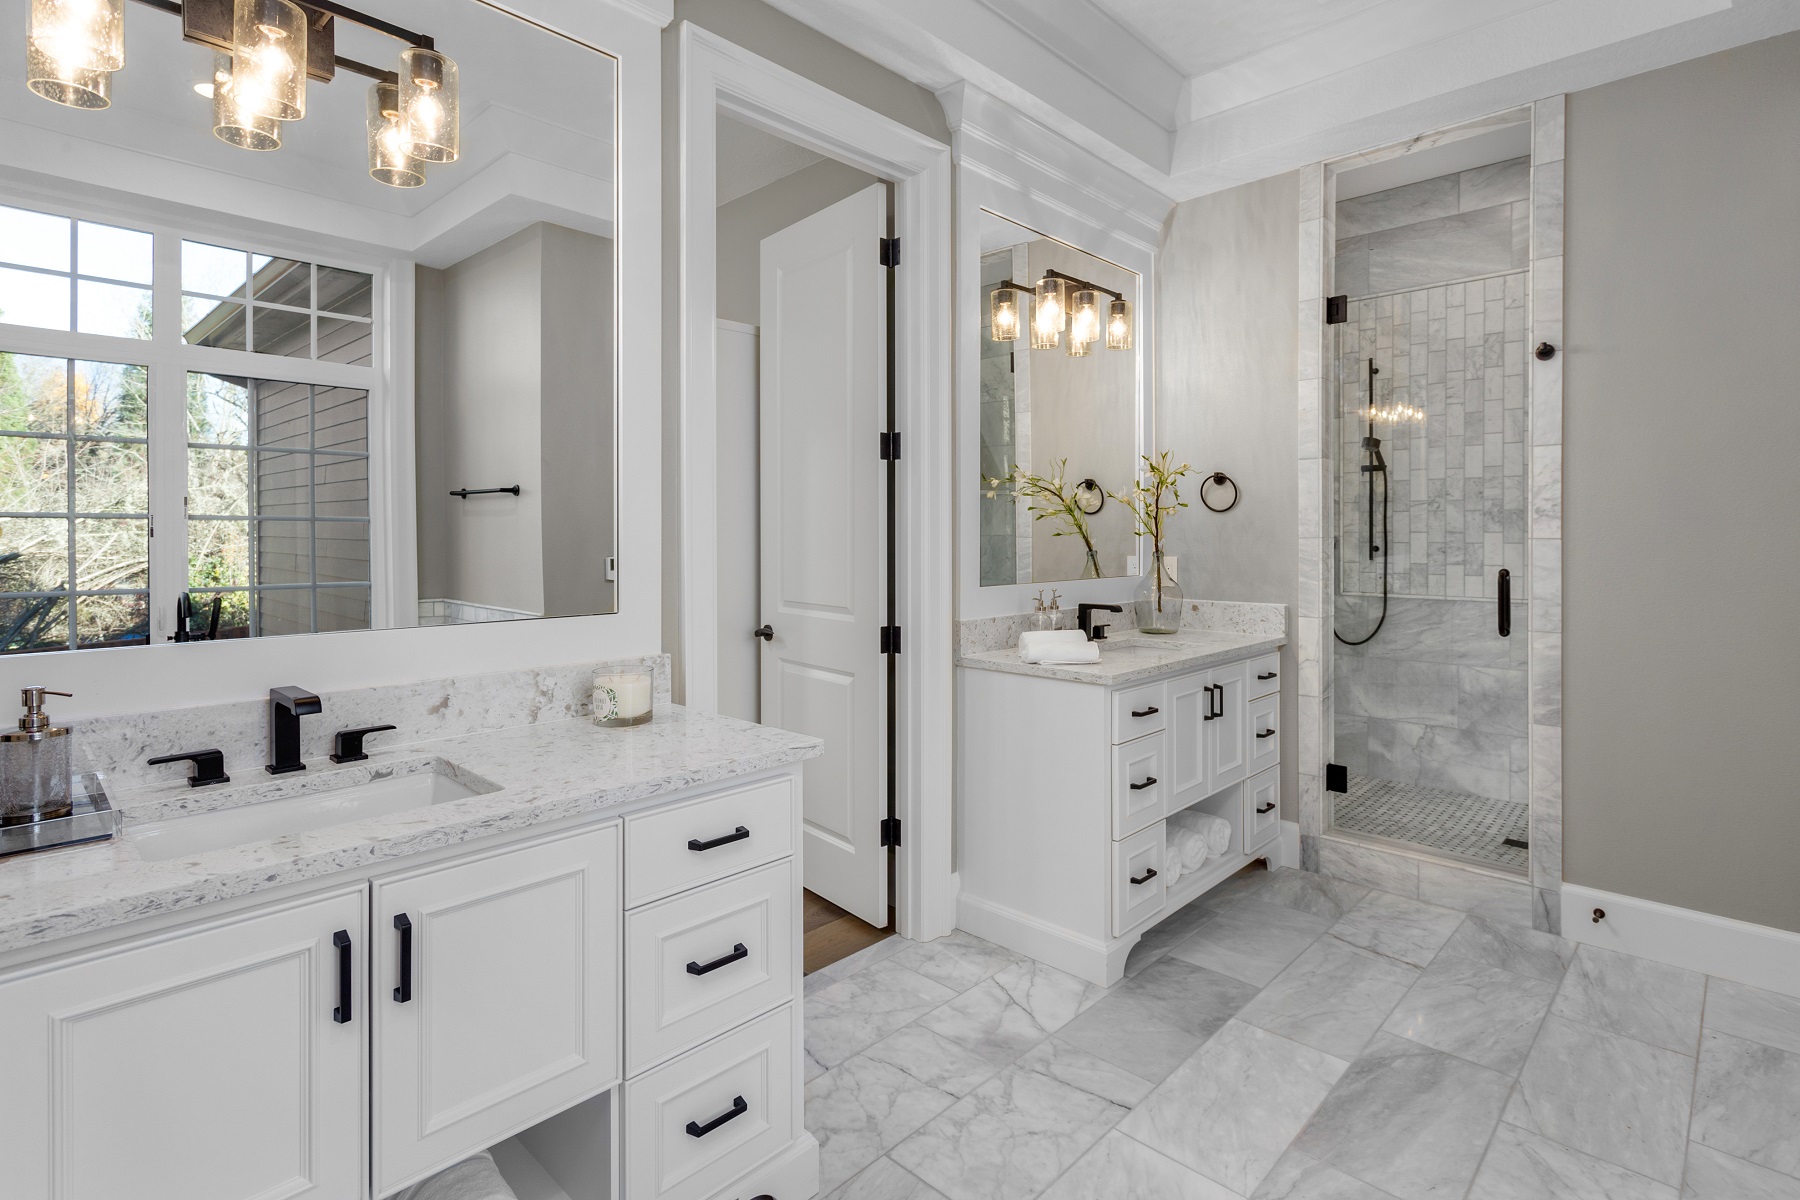 Save Money On Your Bathroom Remodel, Remodel Bathroom Pictures